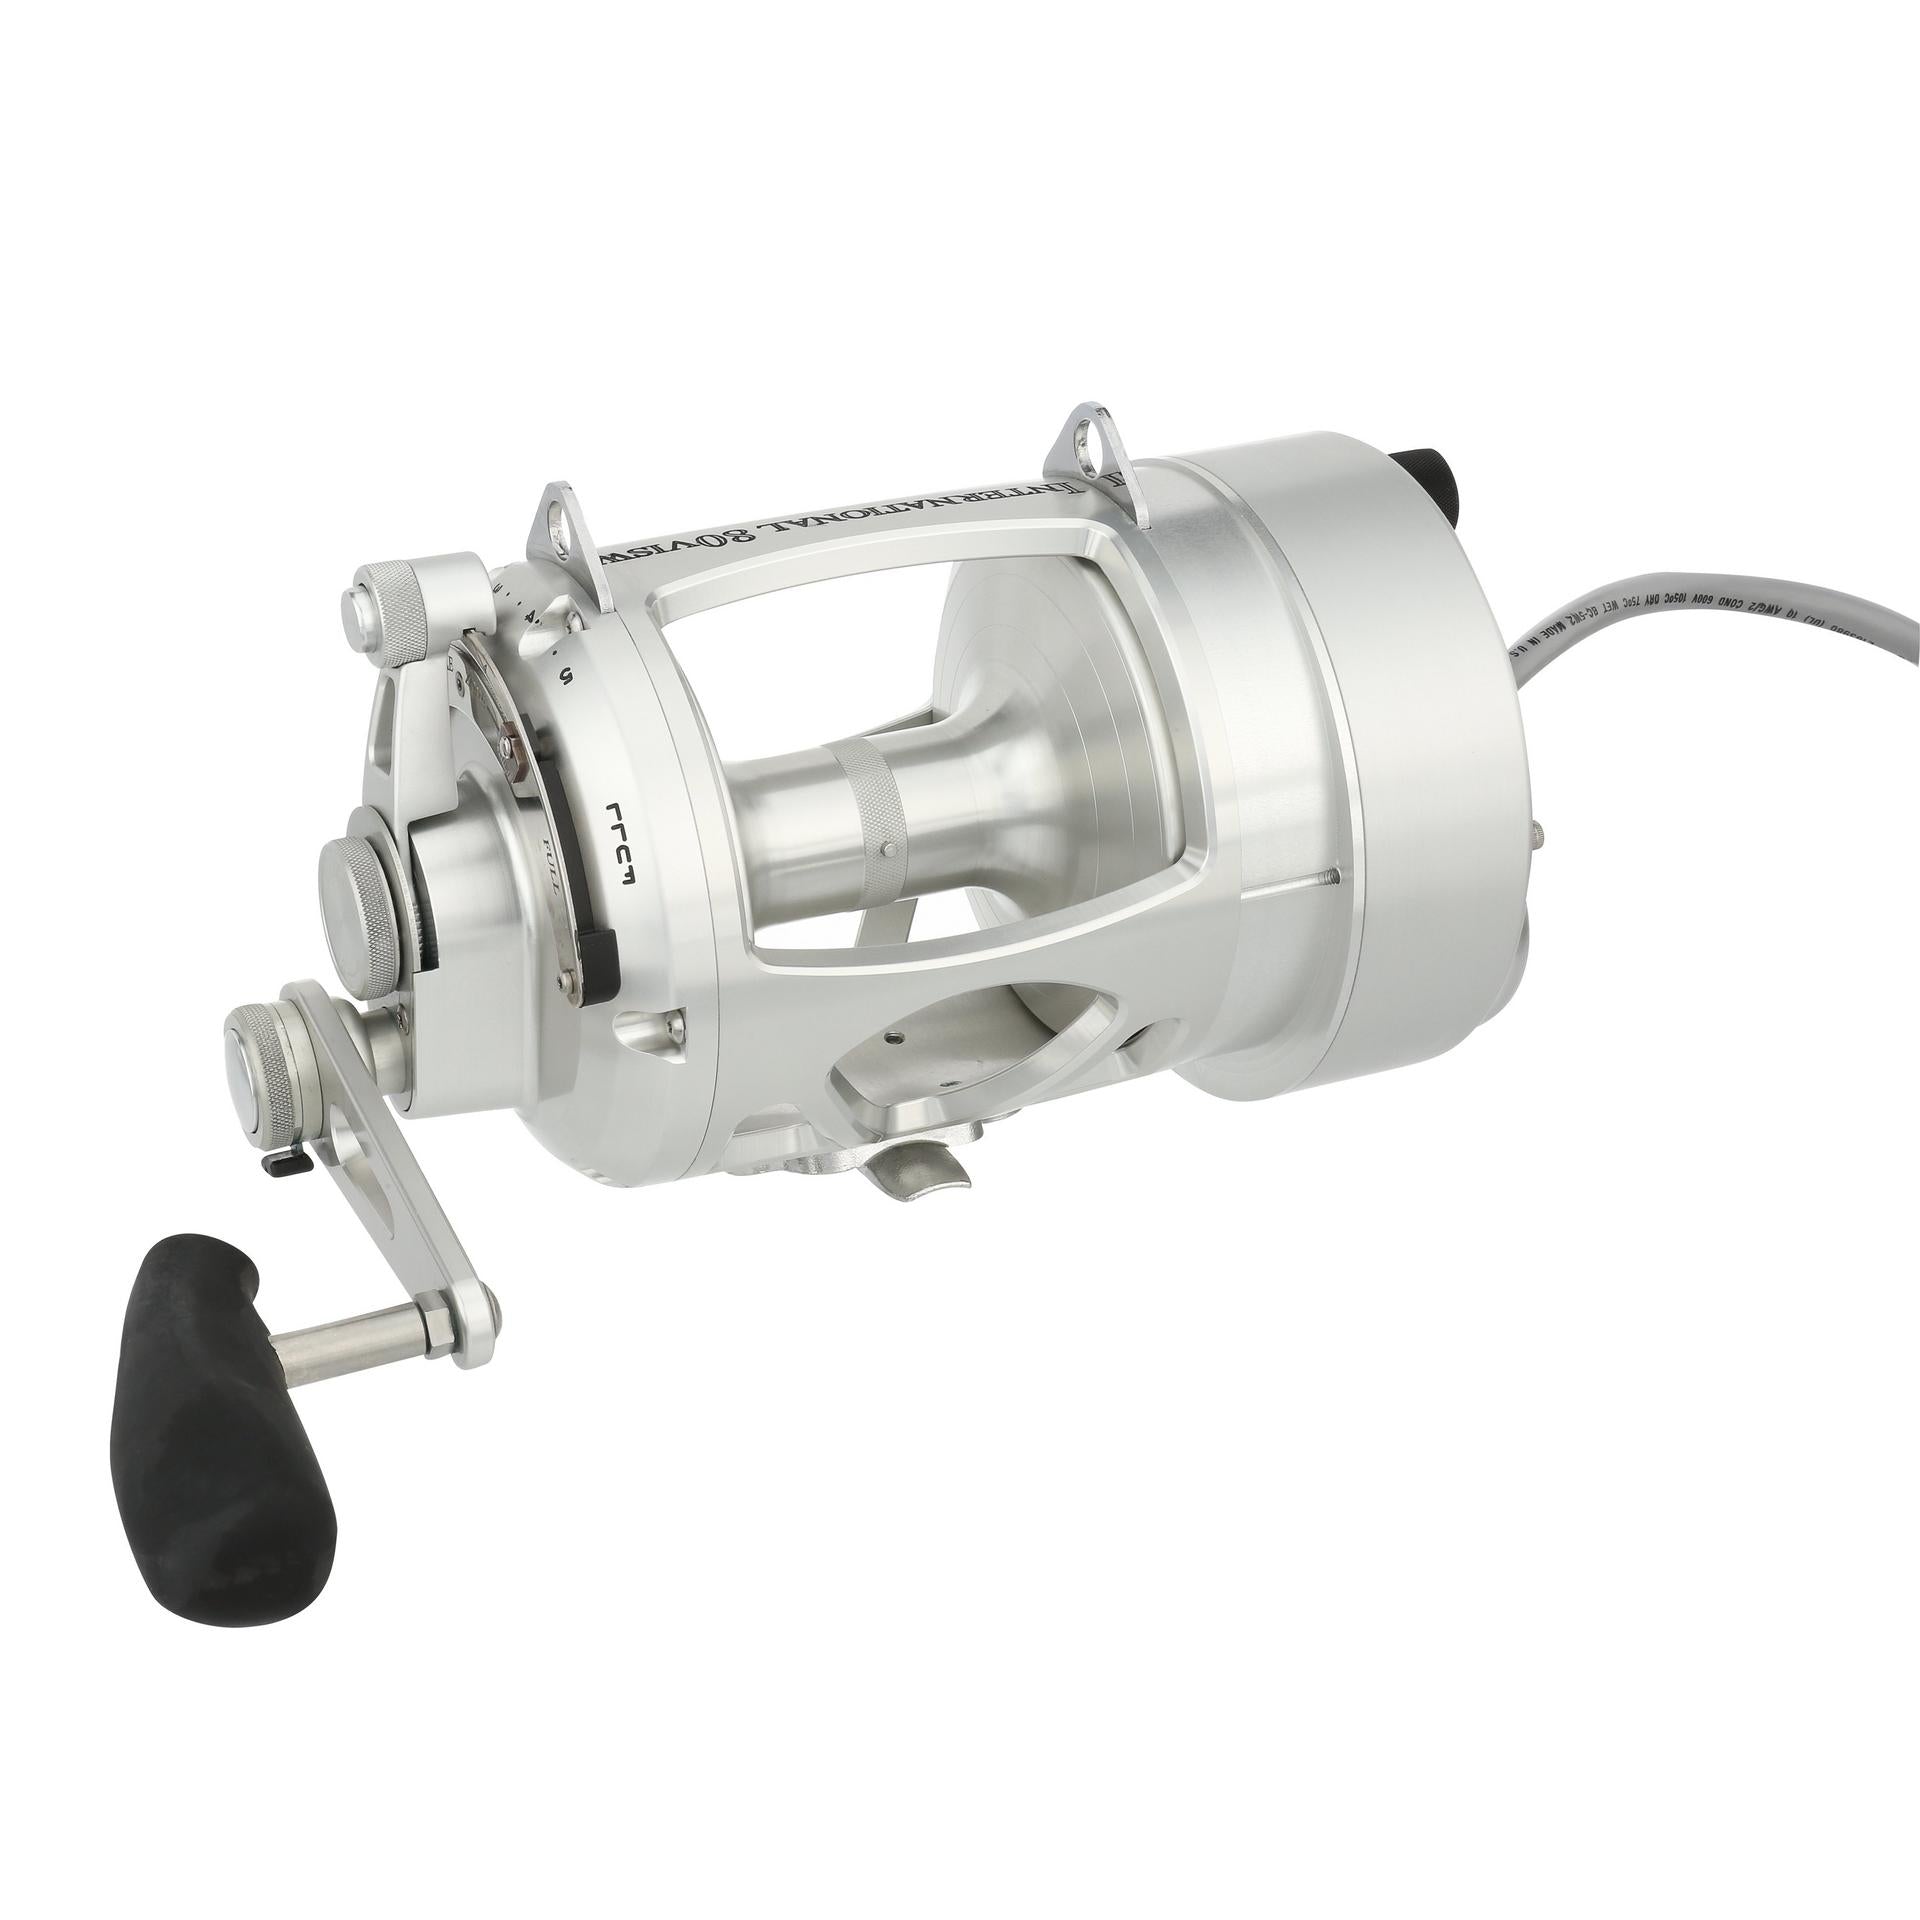 Dolphin Penn International 50wide Electric Reel for Sale in North